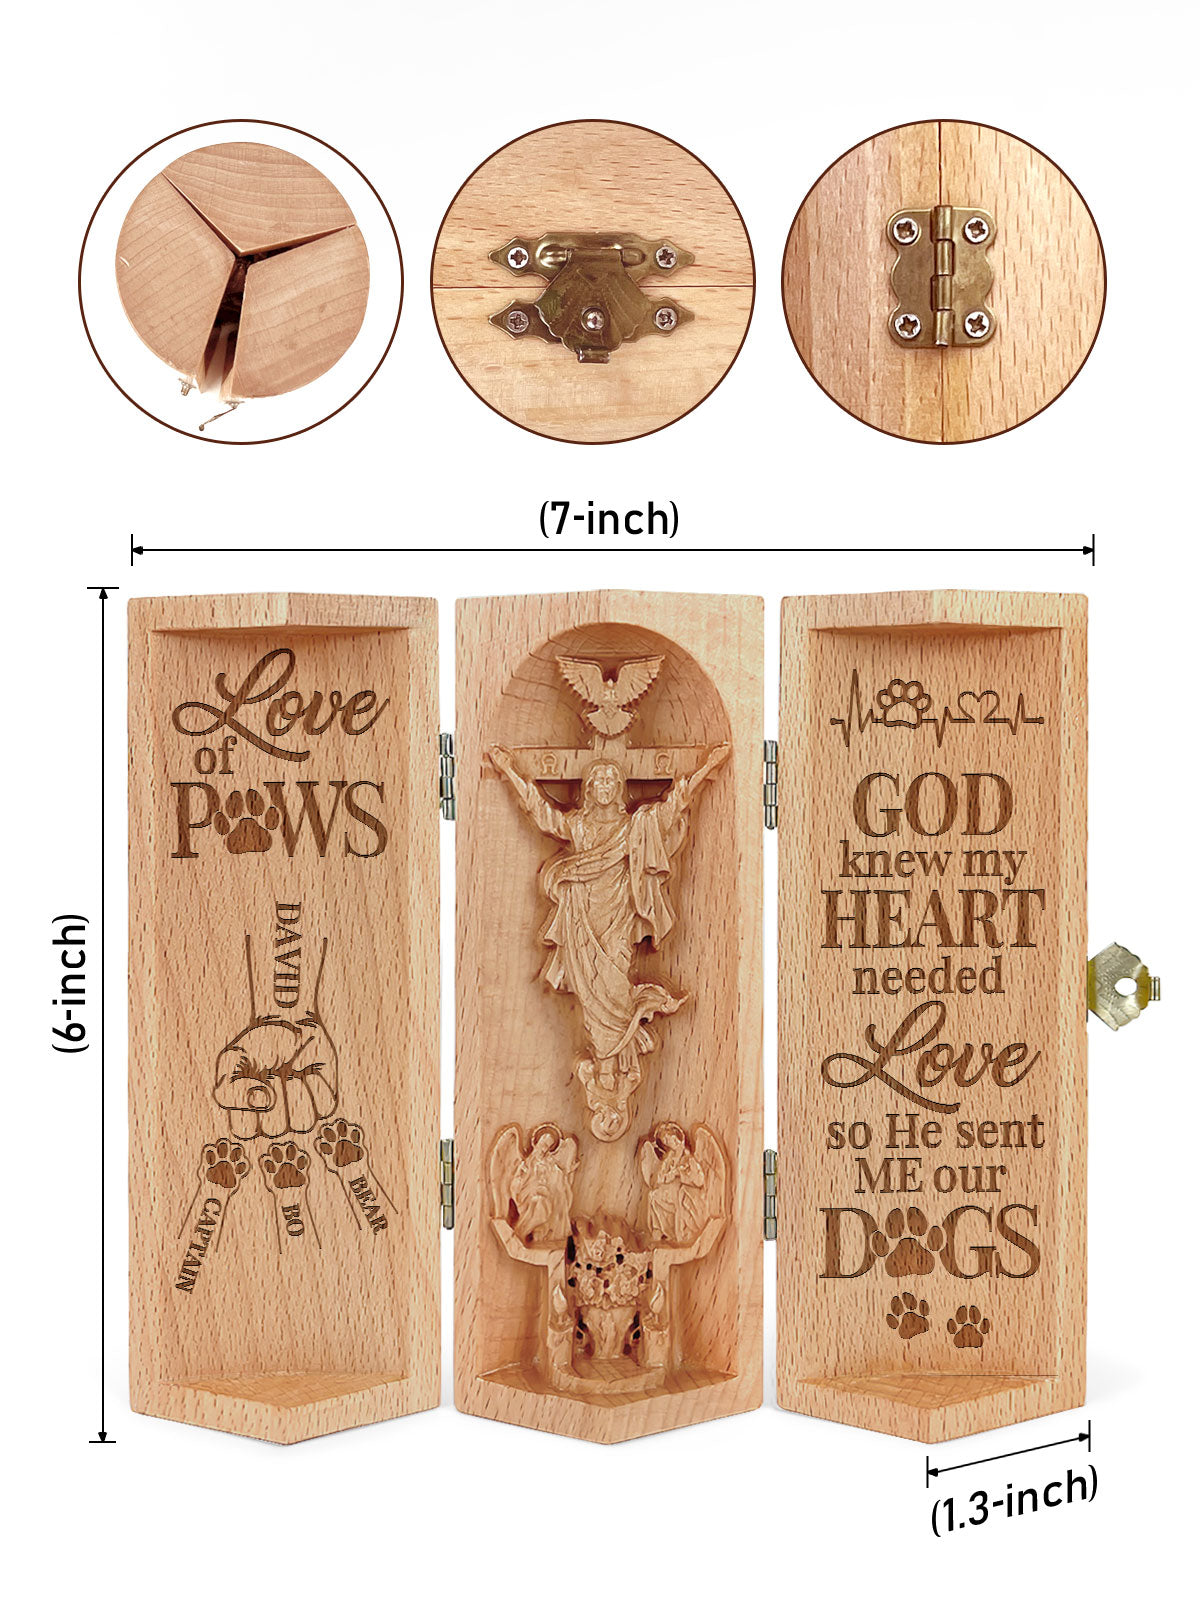 Love Of Paws - Personalized Openable Wooden Cylinder Sculpture of Jesus Christ CVSH07